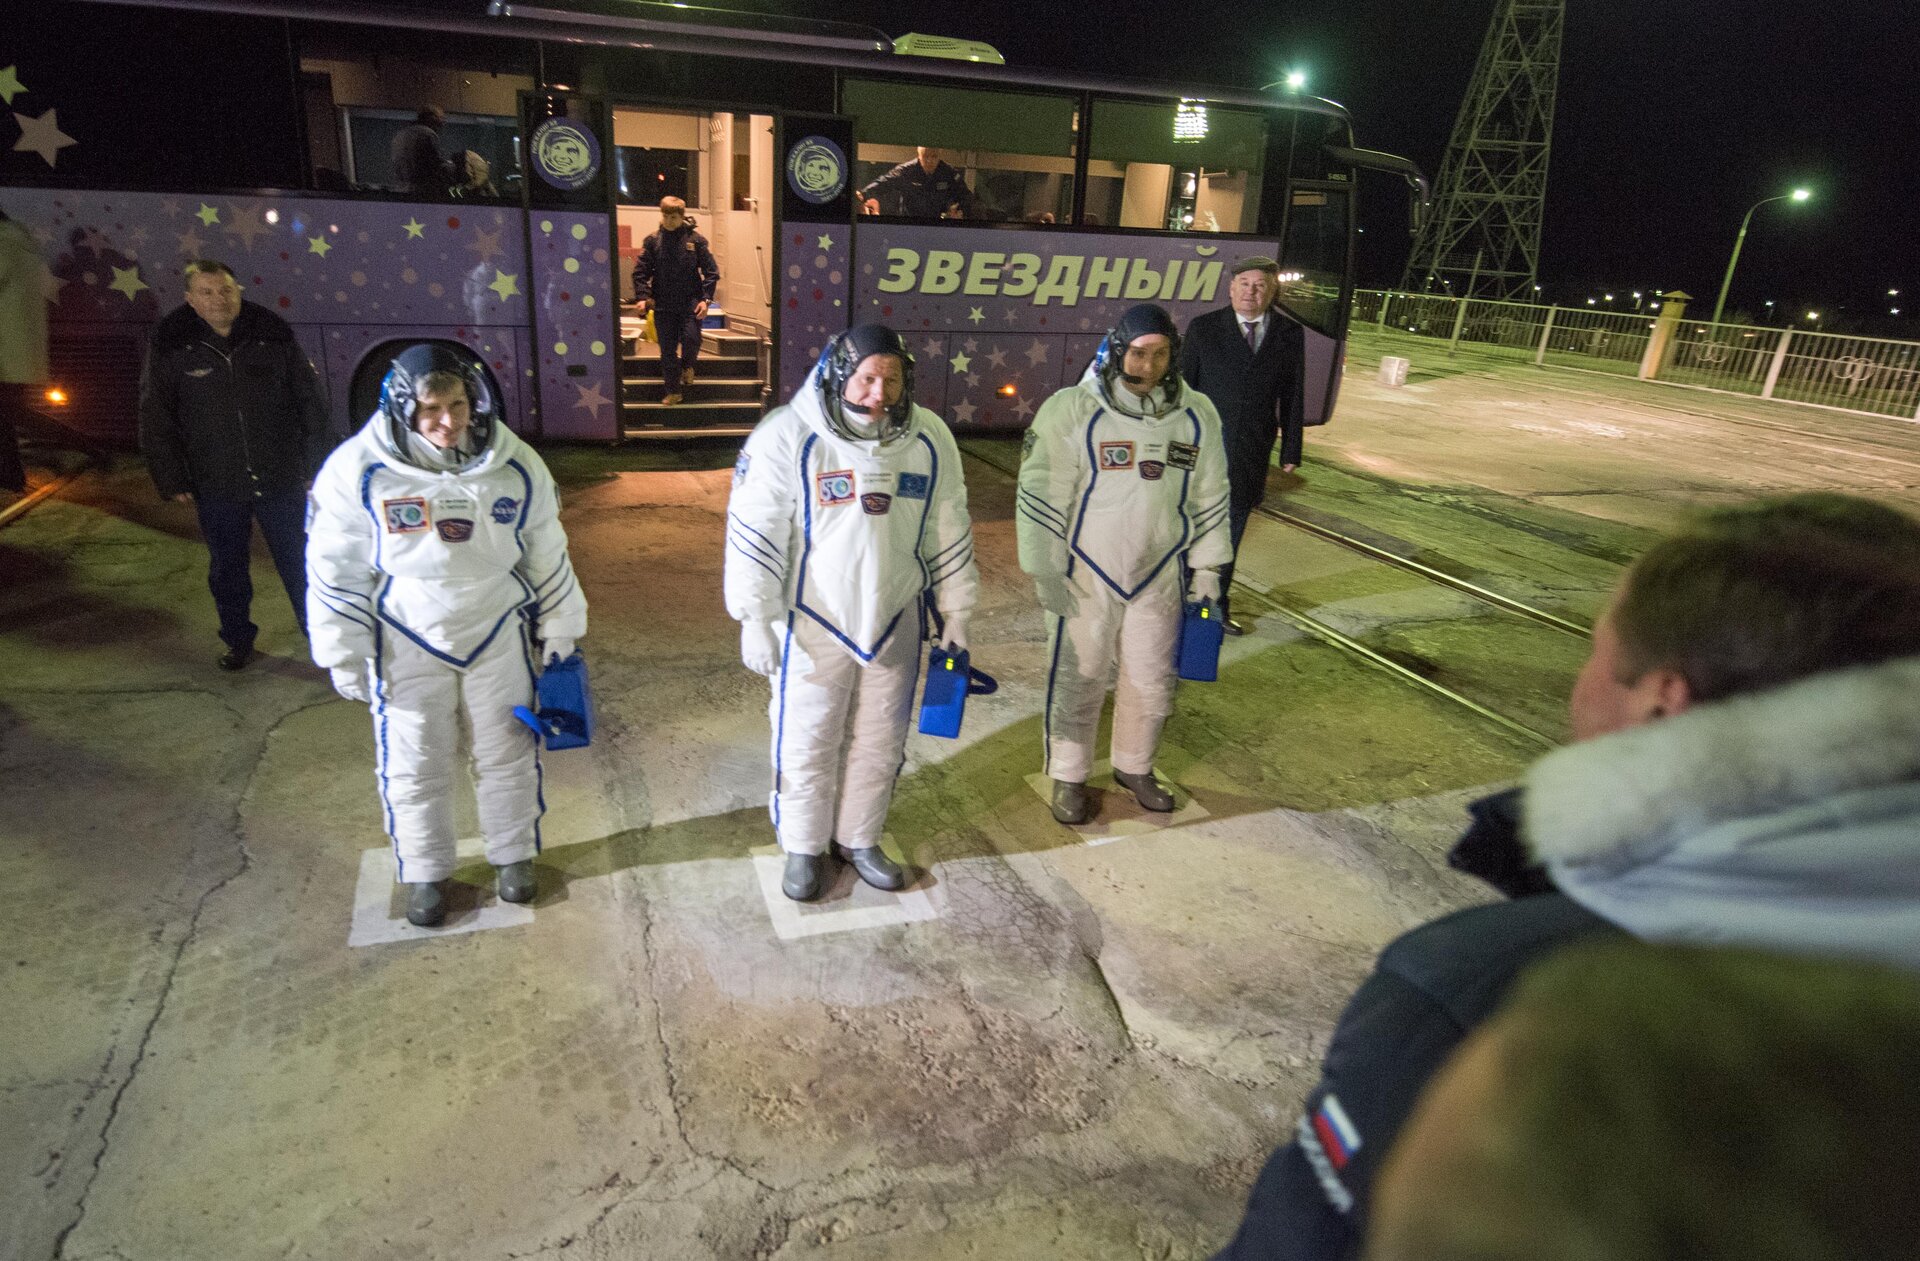 Expedition 50 crewmembers arriving at the launch pad